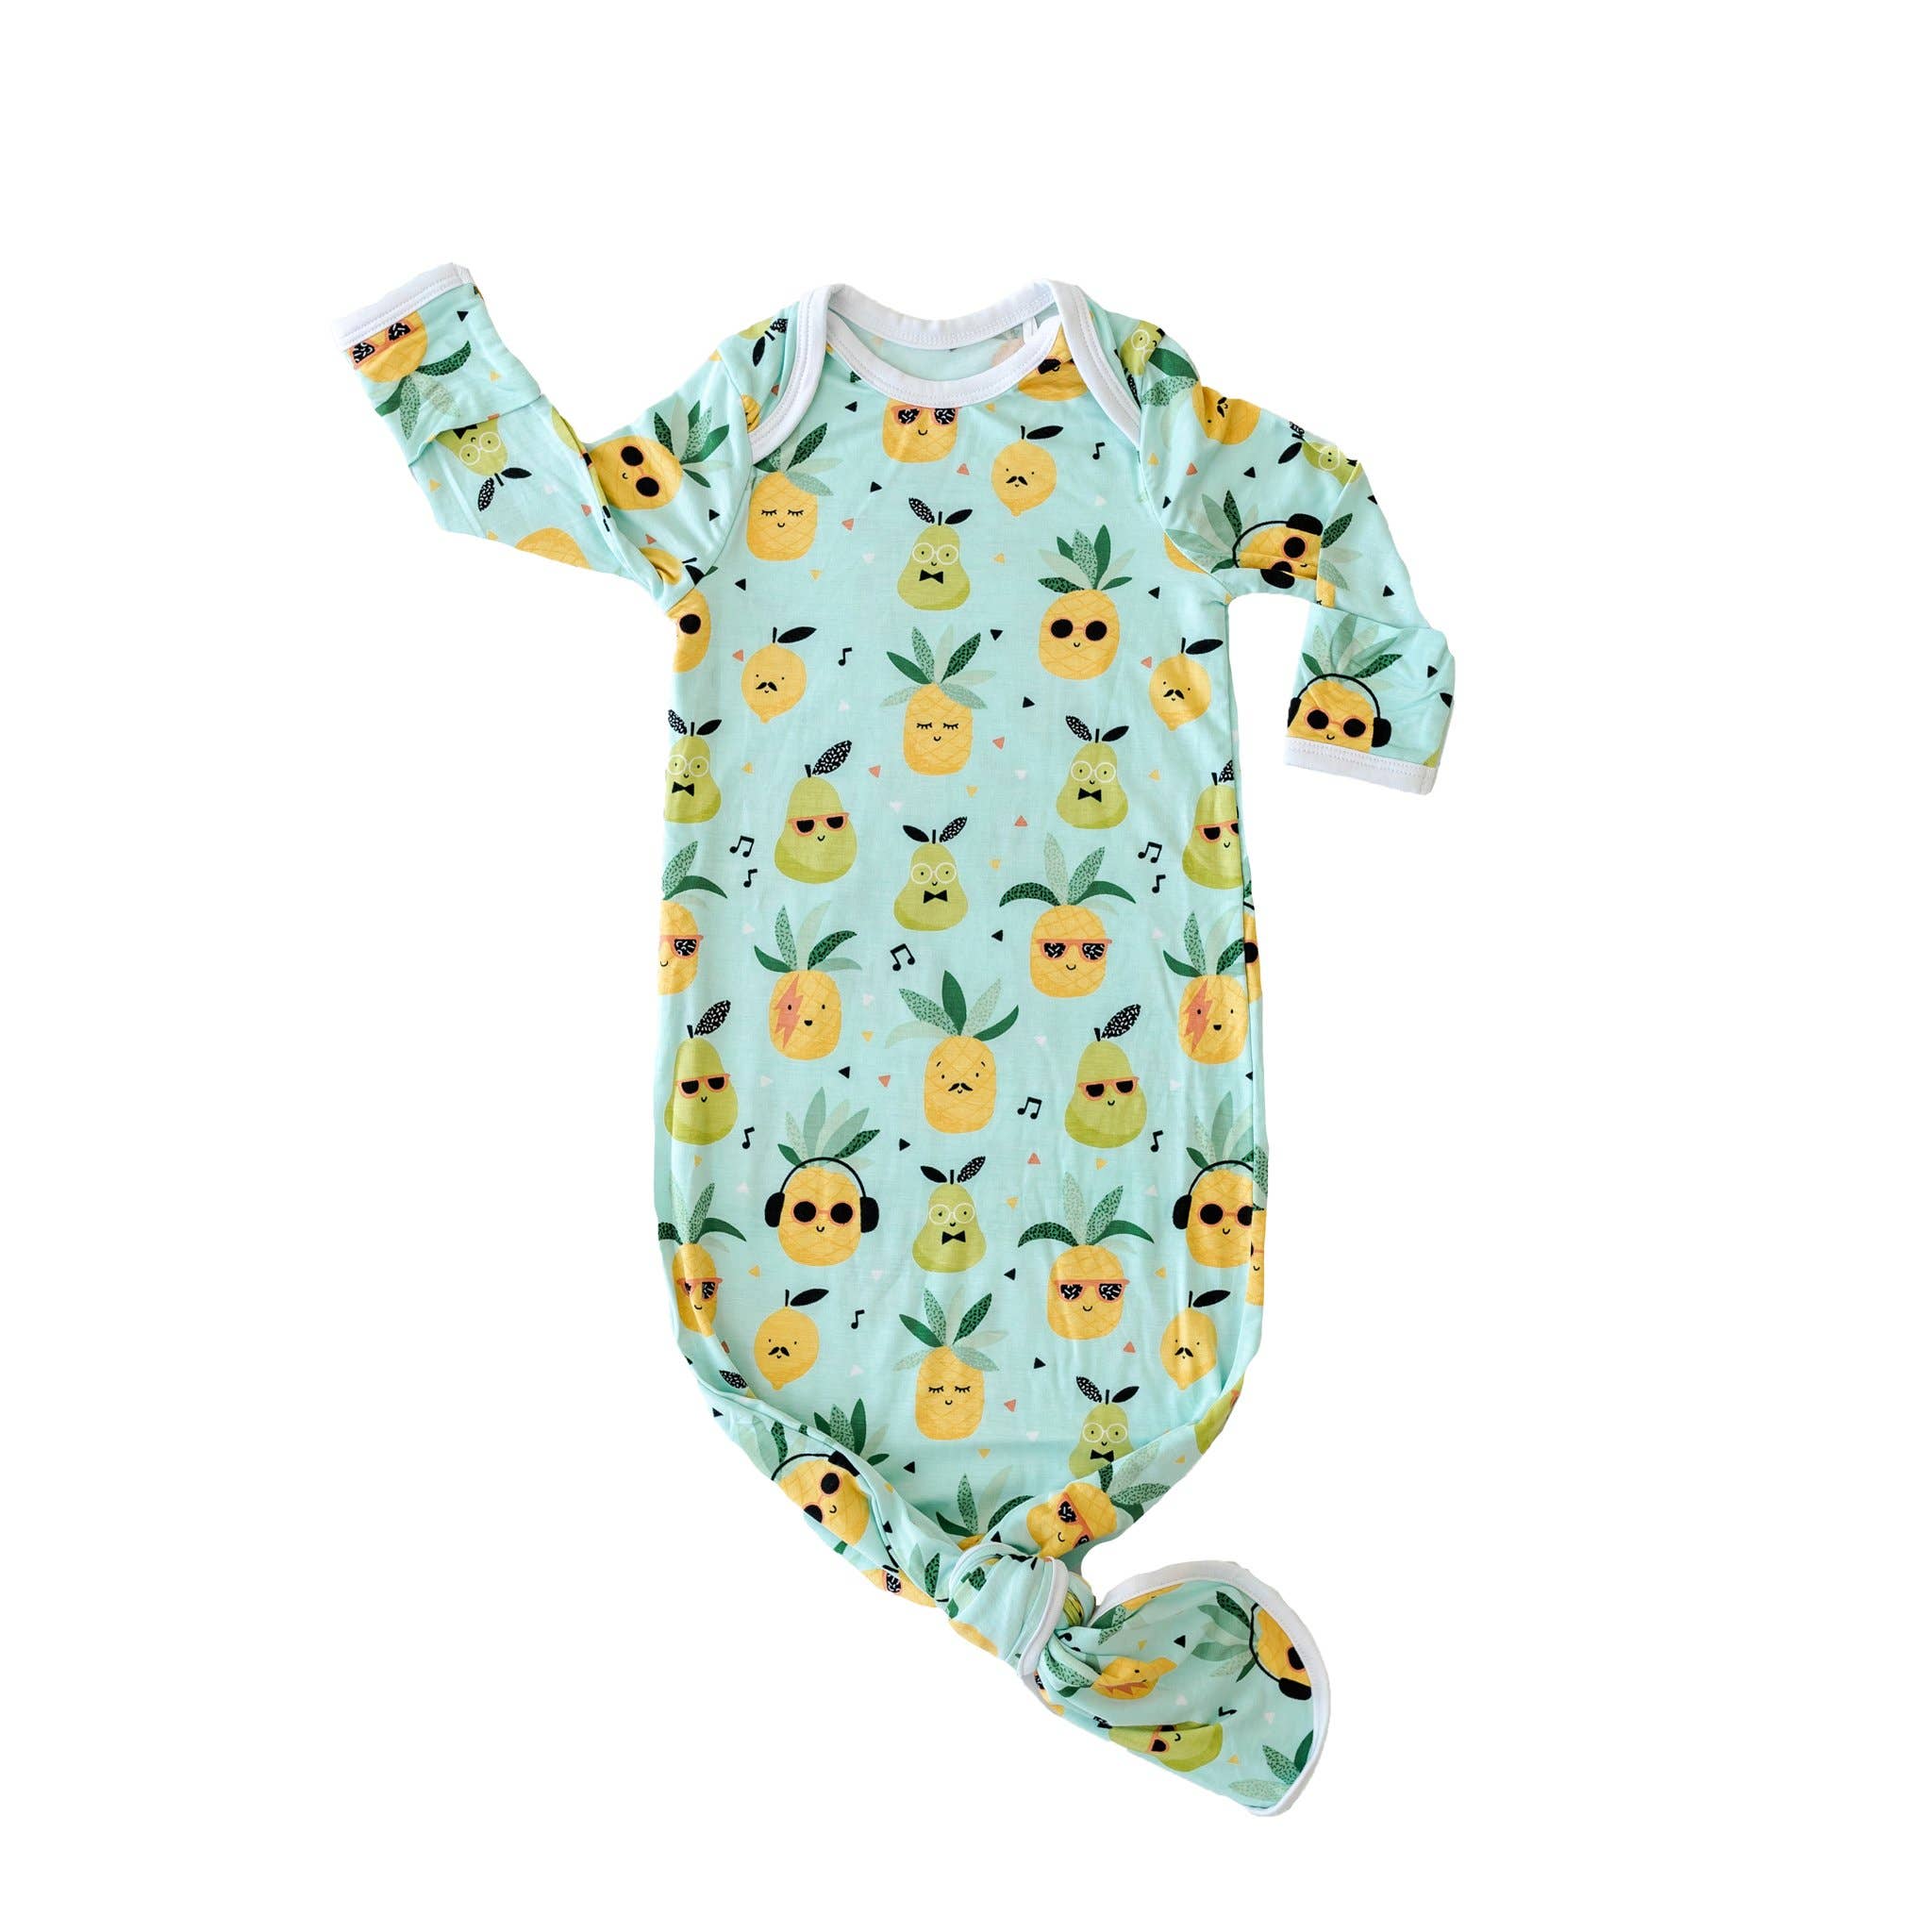 find wholesale baby clothes suppliers